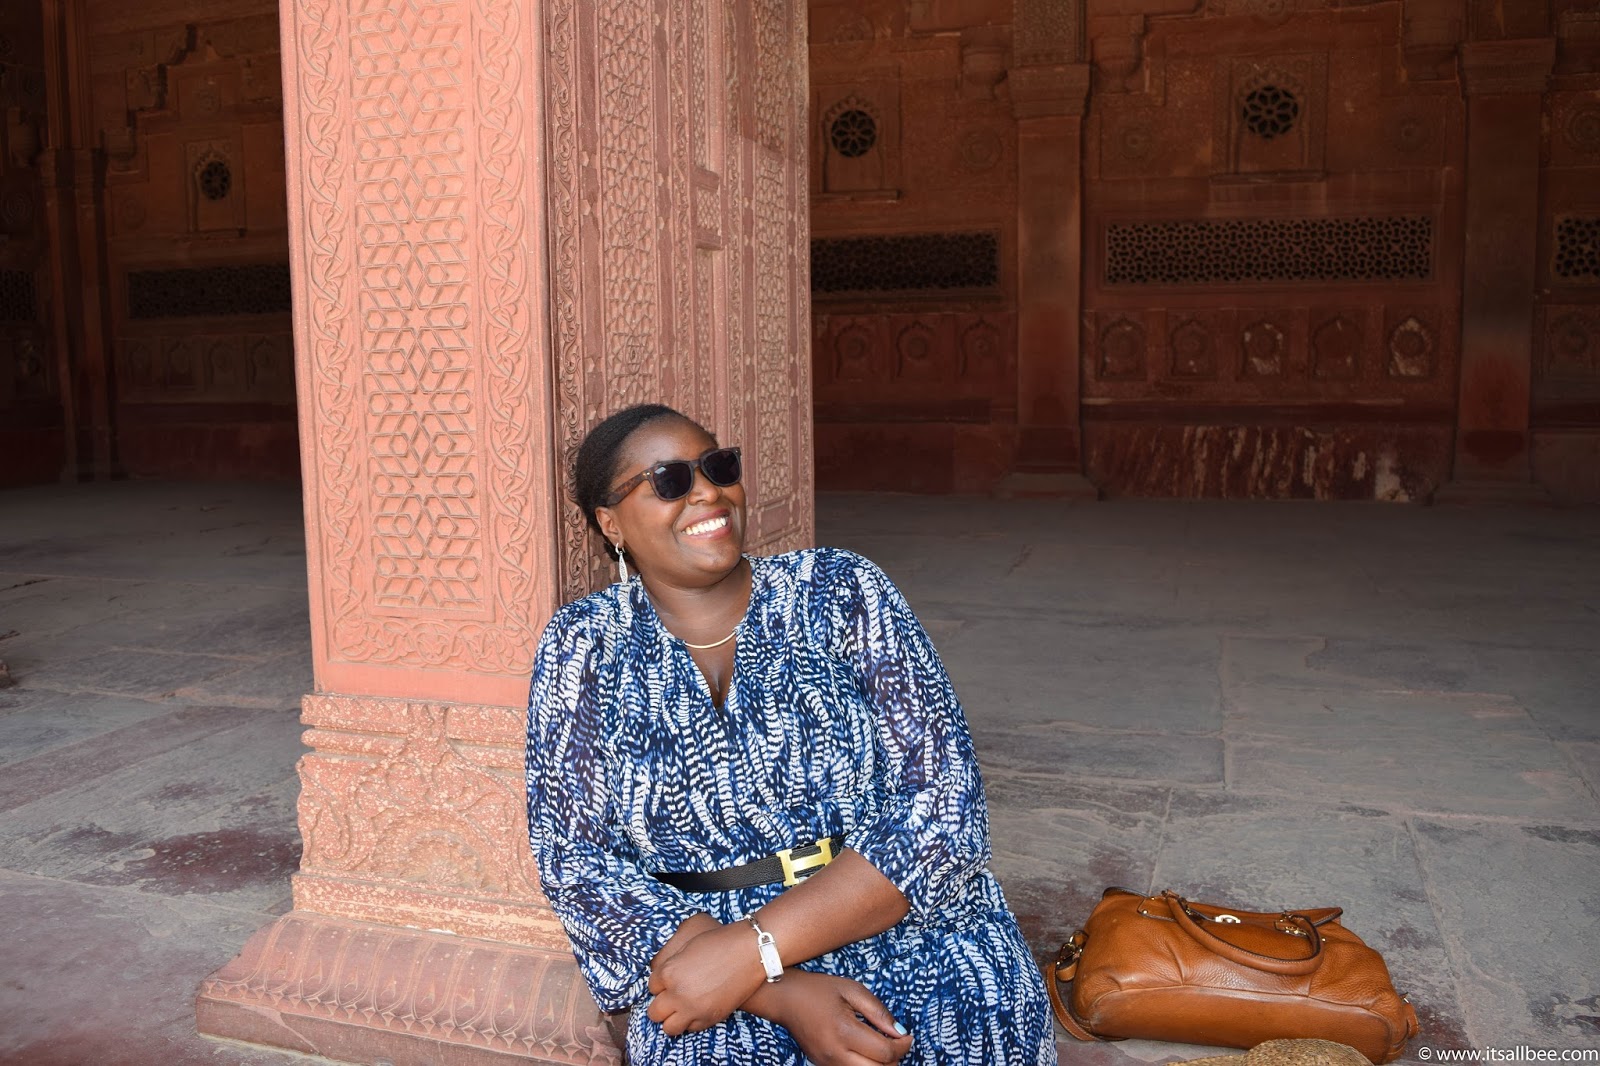 Visiting The Agra Fort - Photo by Bianca Malata - www.itsallbee.com